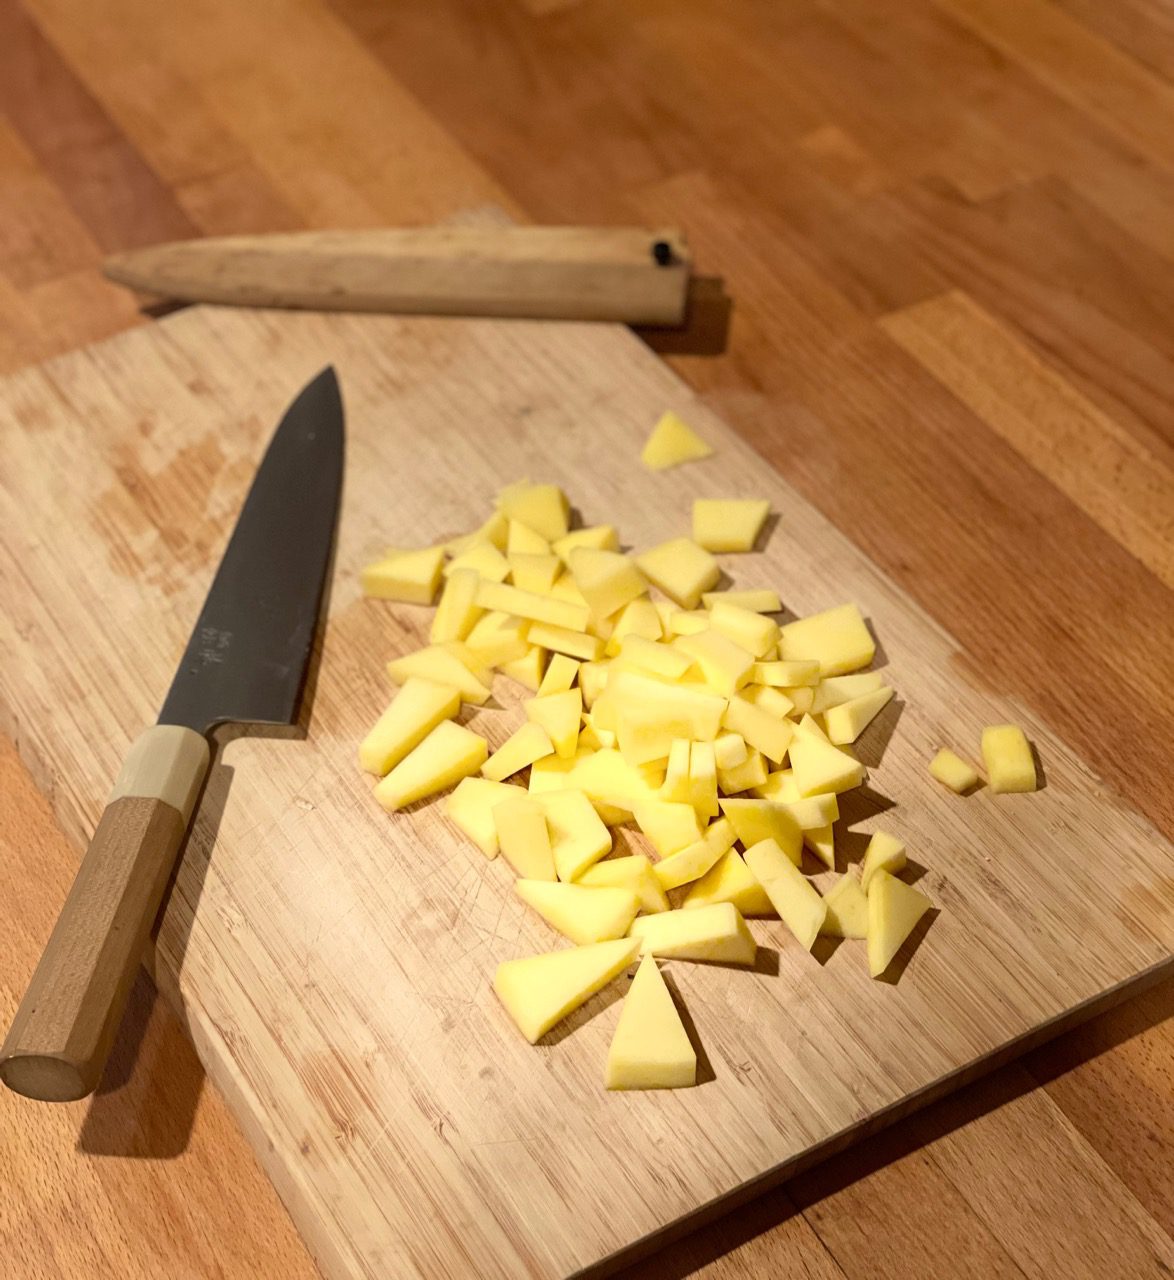 Warm wood cutting board with chopped mango and a beautiful Japanese knife set gently on the surface